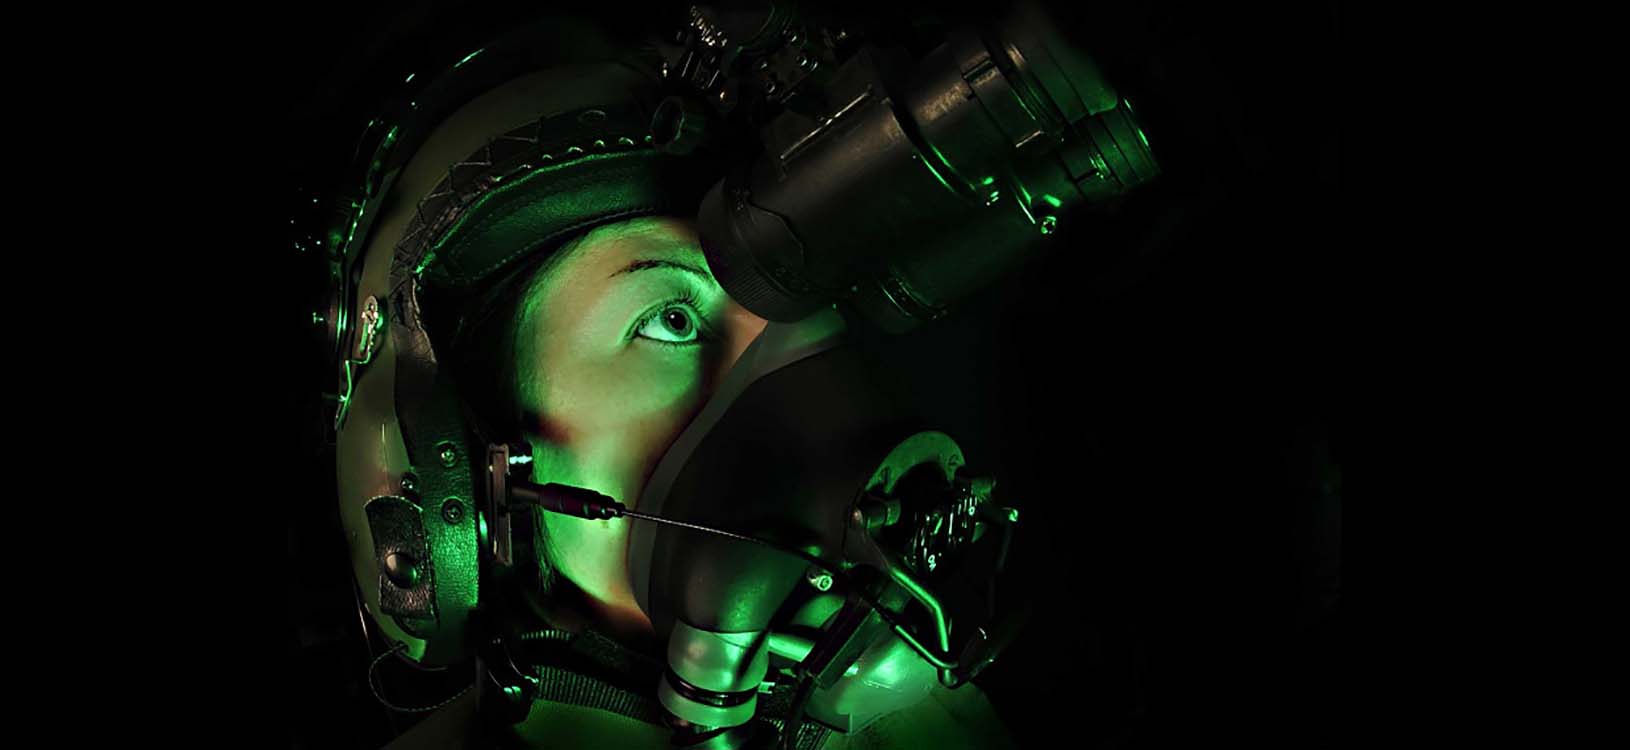 New horizons of night vision technology